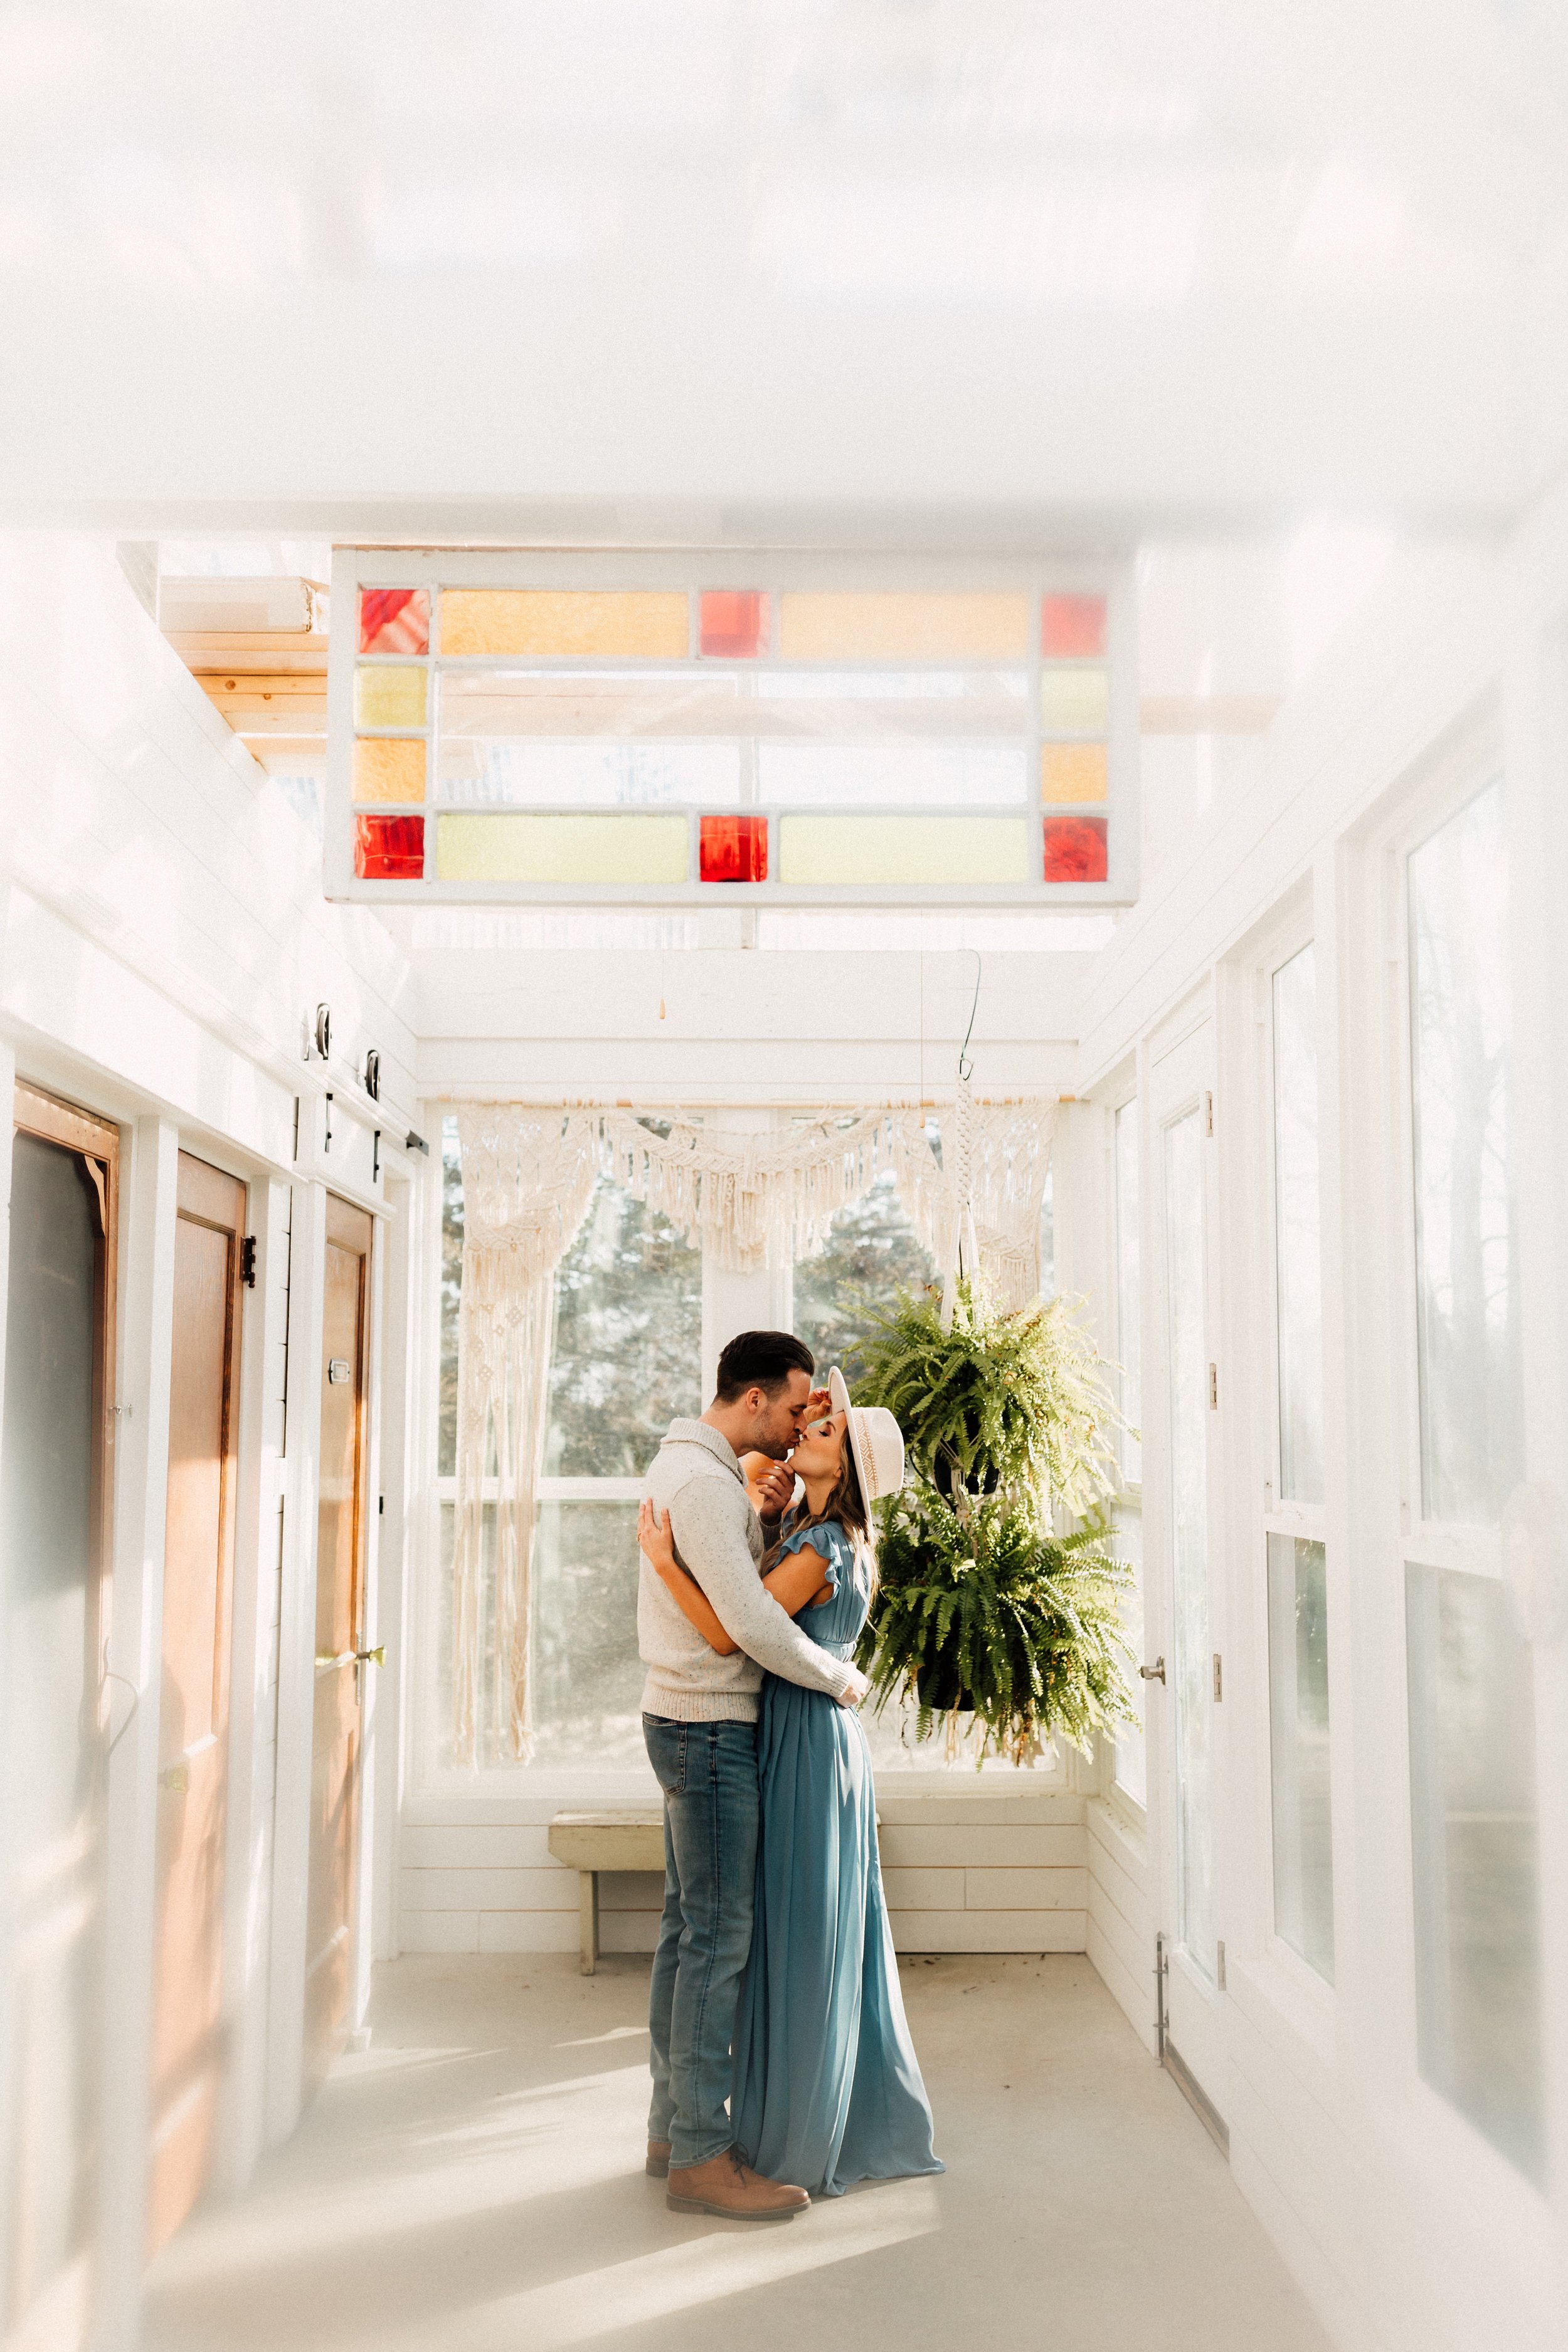 Laura_Ben_Engagment_Session_Winterset_Des_moines_Iowa_Couples_Photographer_Iris_Aisle_Cabin_Conservatory_Candid_Snow_Day_Winter_KMP_Photography-9028.jpg